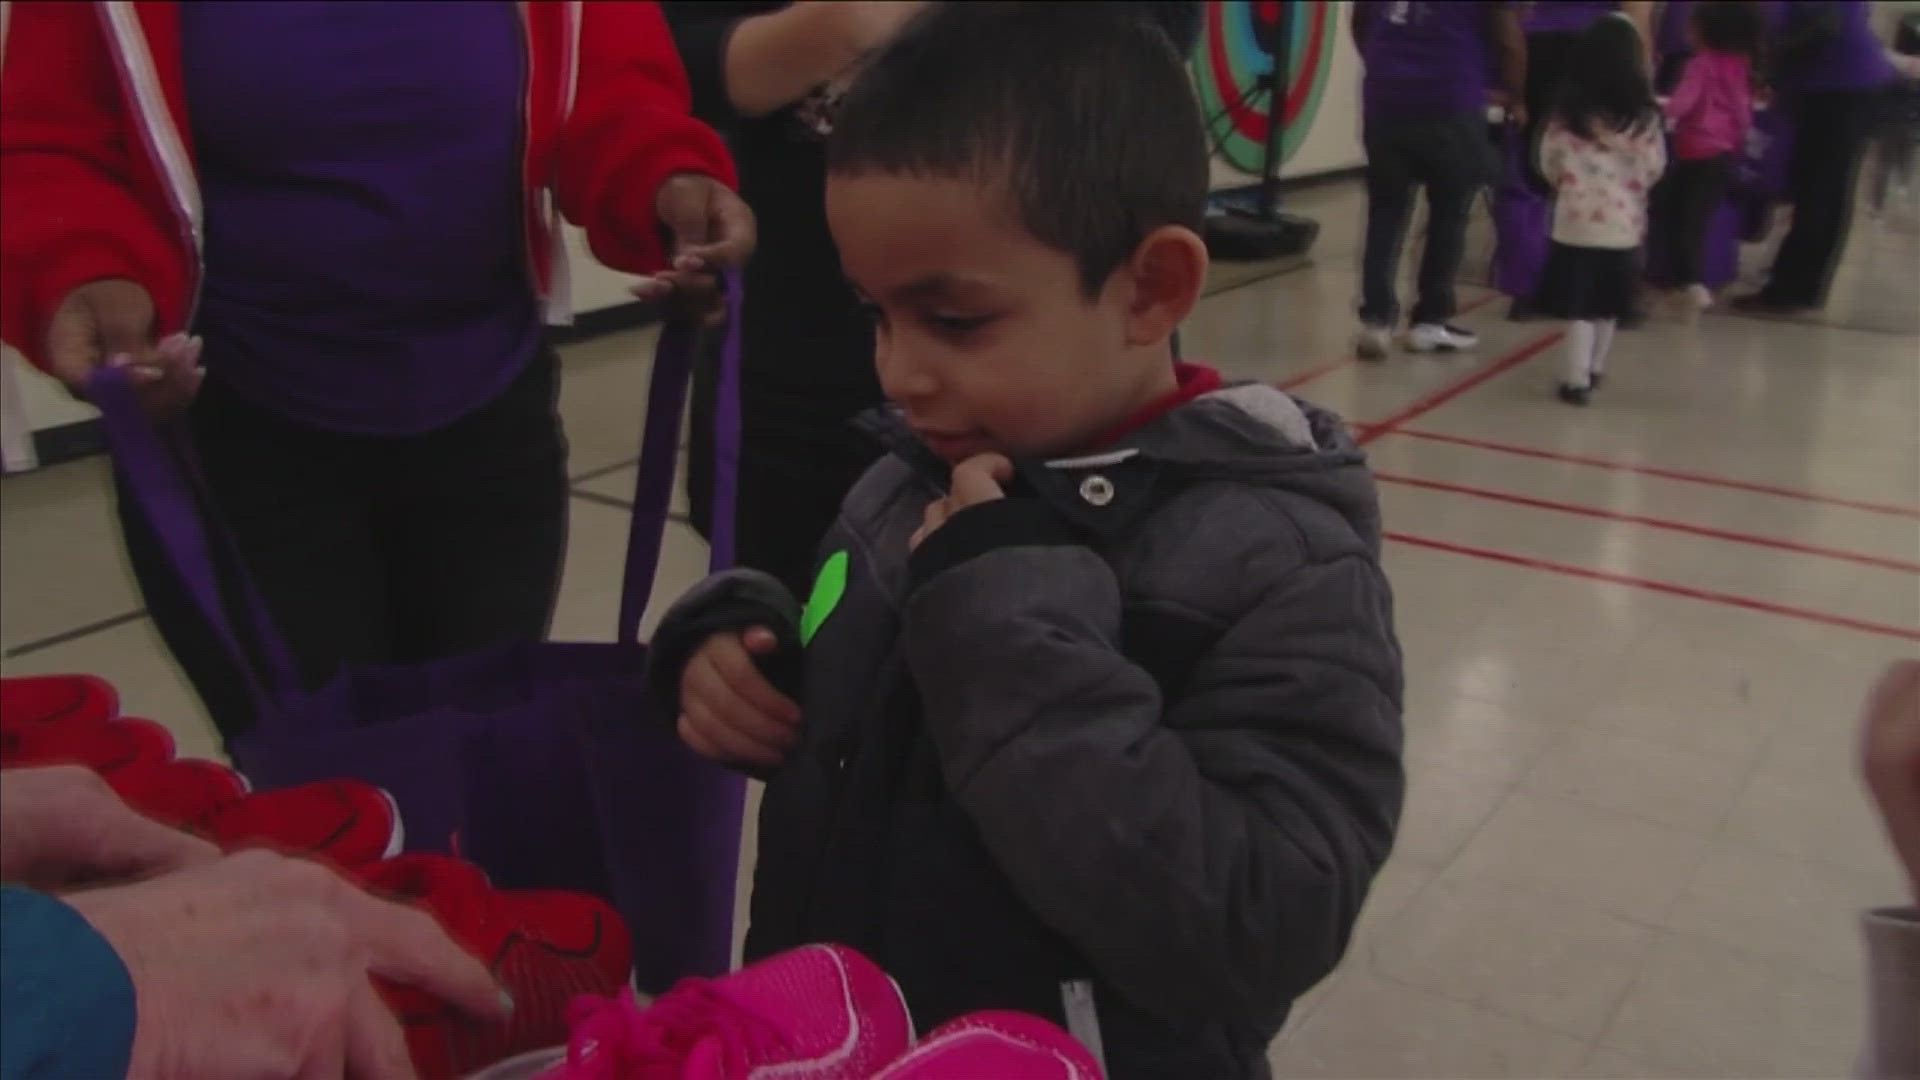 The company and non-profit teamed up to provide new shoes to students at Treadwell Elementary Wednesday.